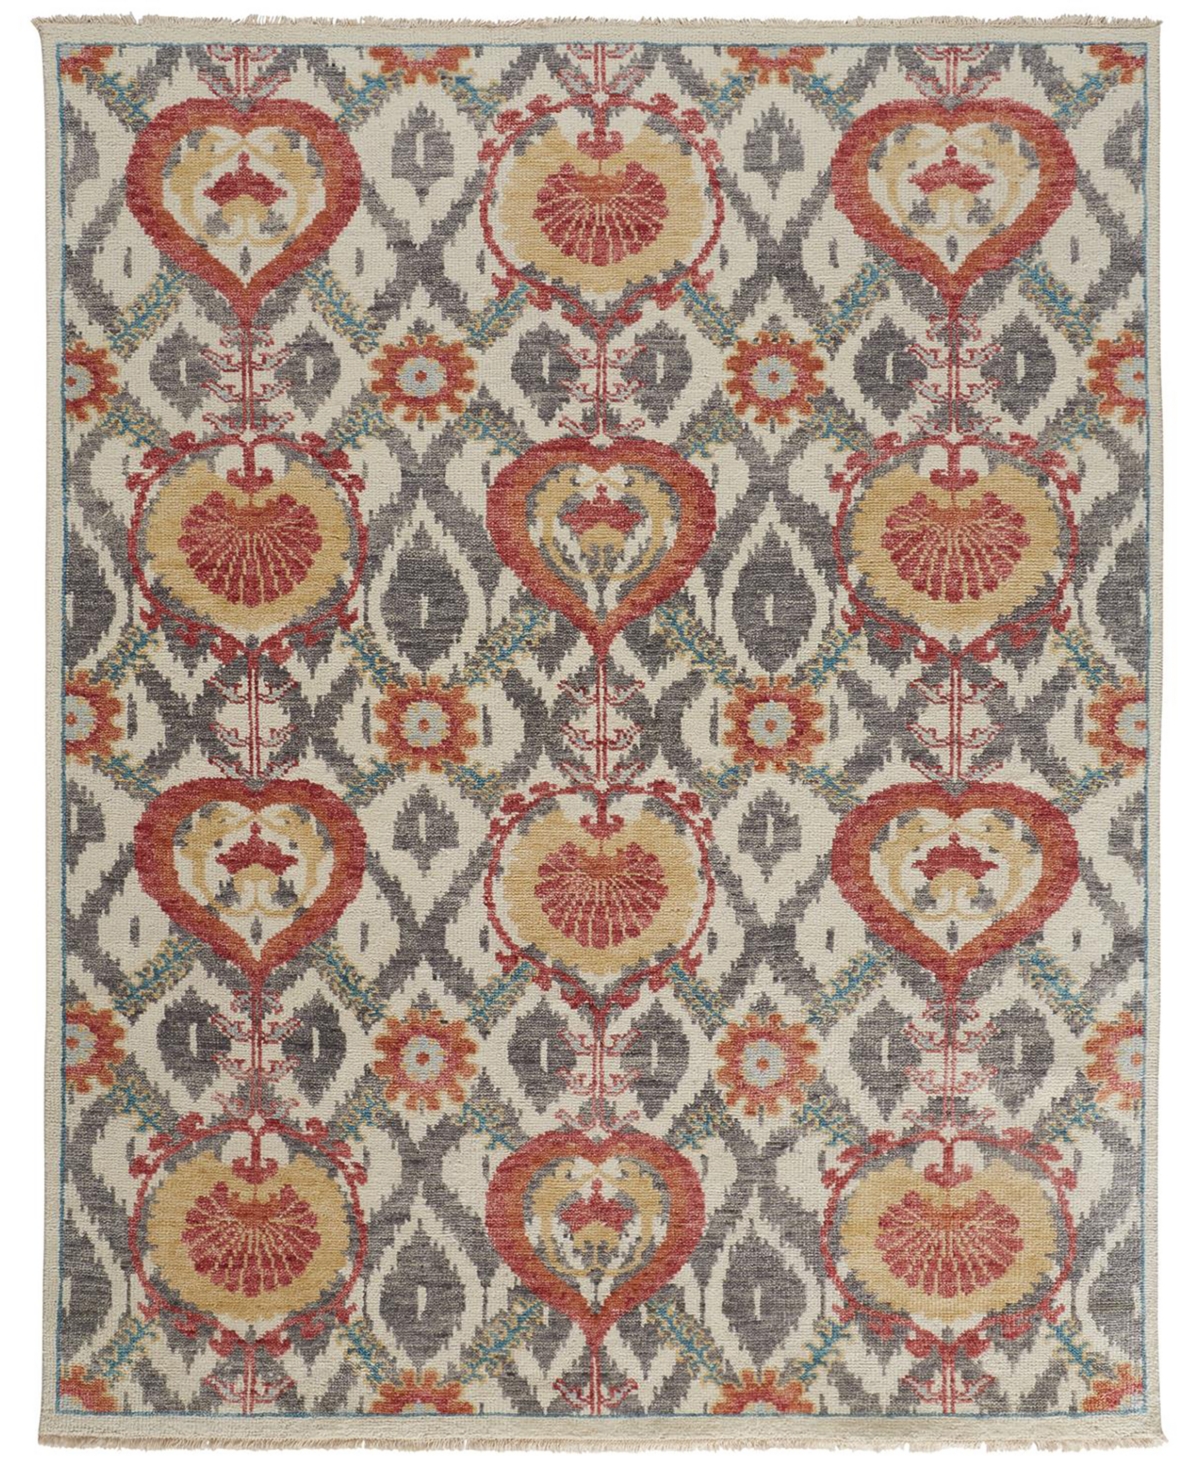 Simply Woven Beall R6712 5'6" X 8'6" Area Rug In Orange